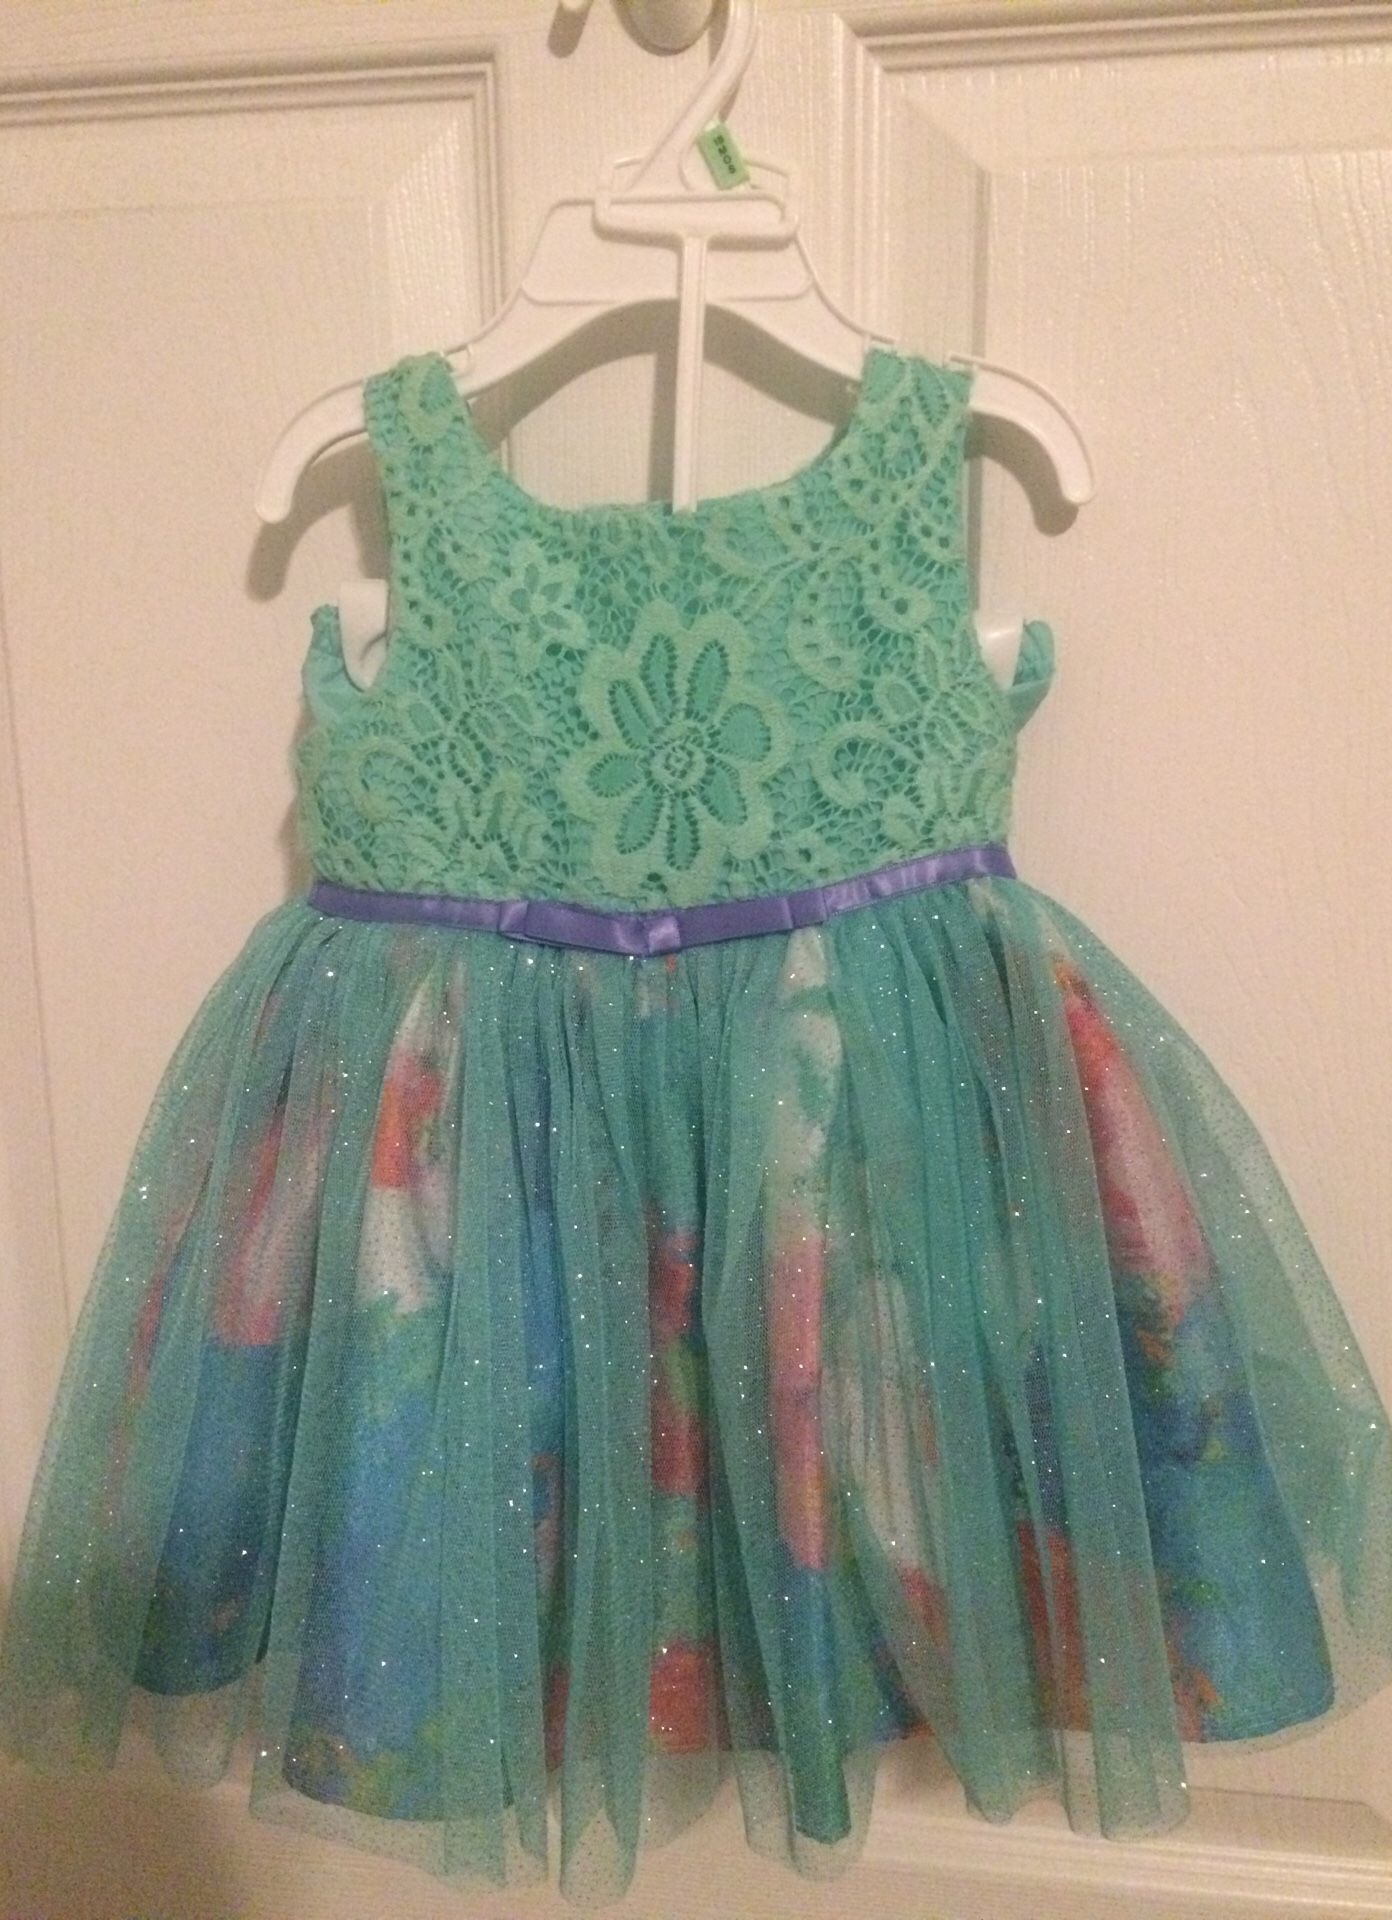 Party dress for baby girl